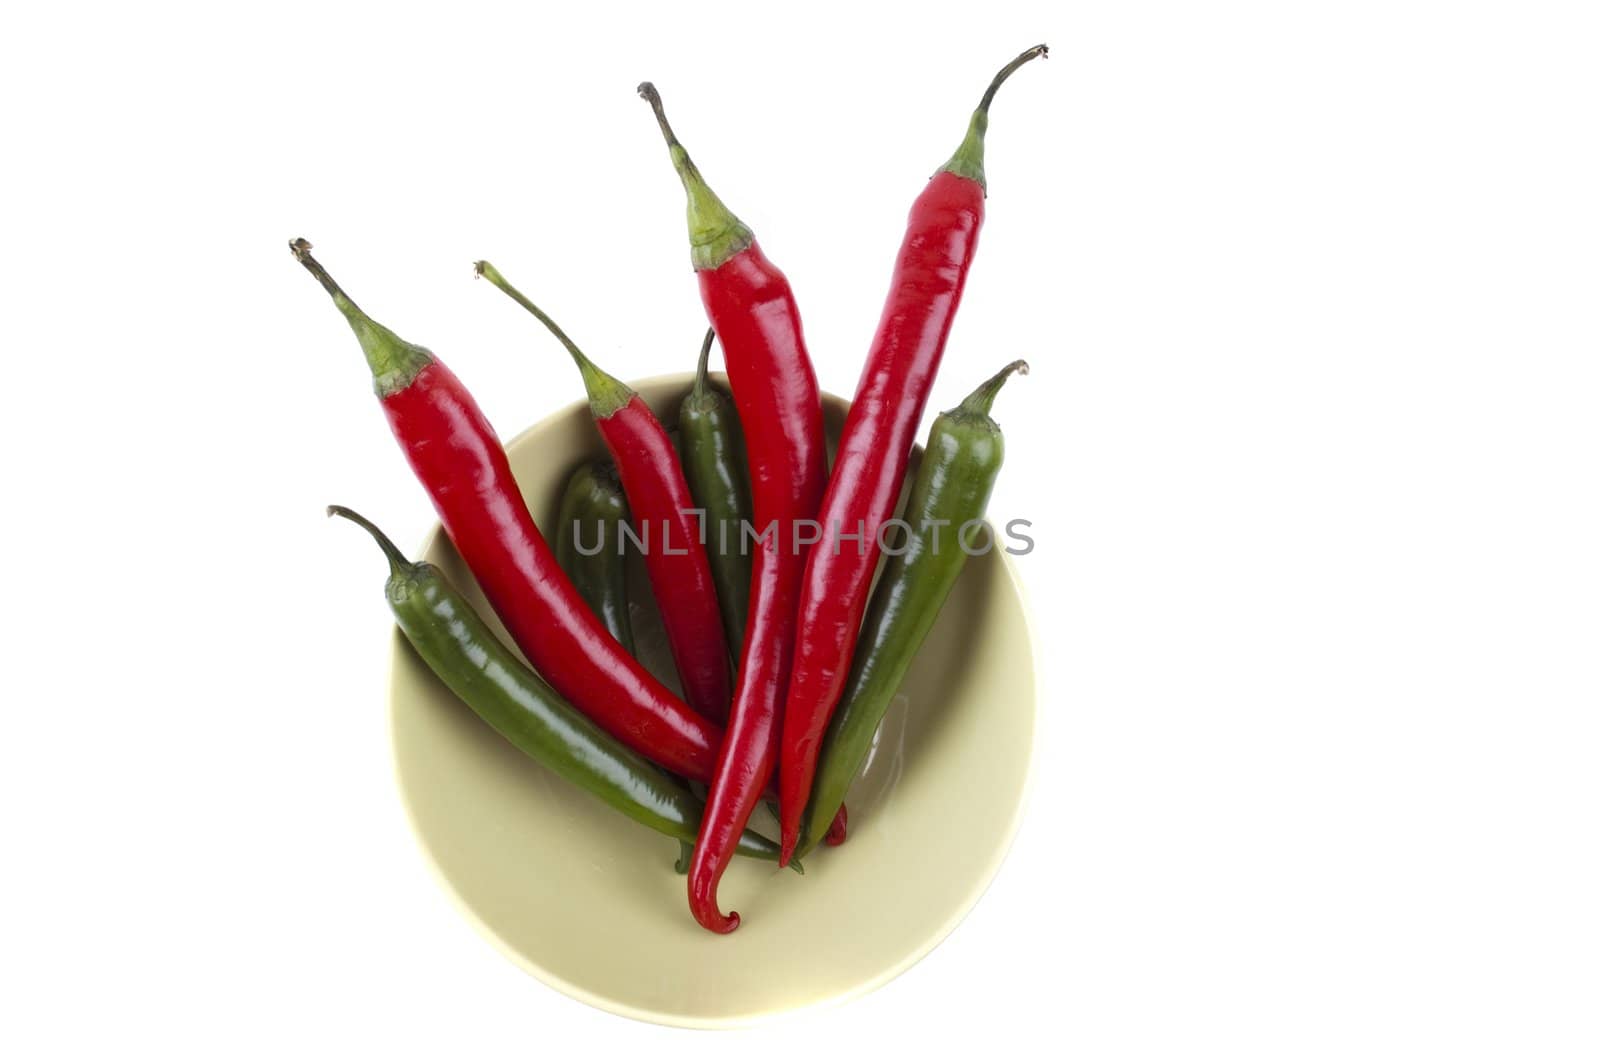 isolated pack of top chili peppers on the plate by Triphka